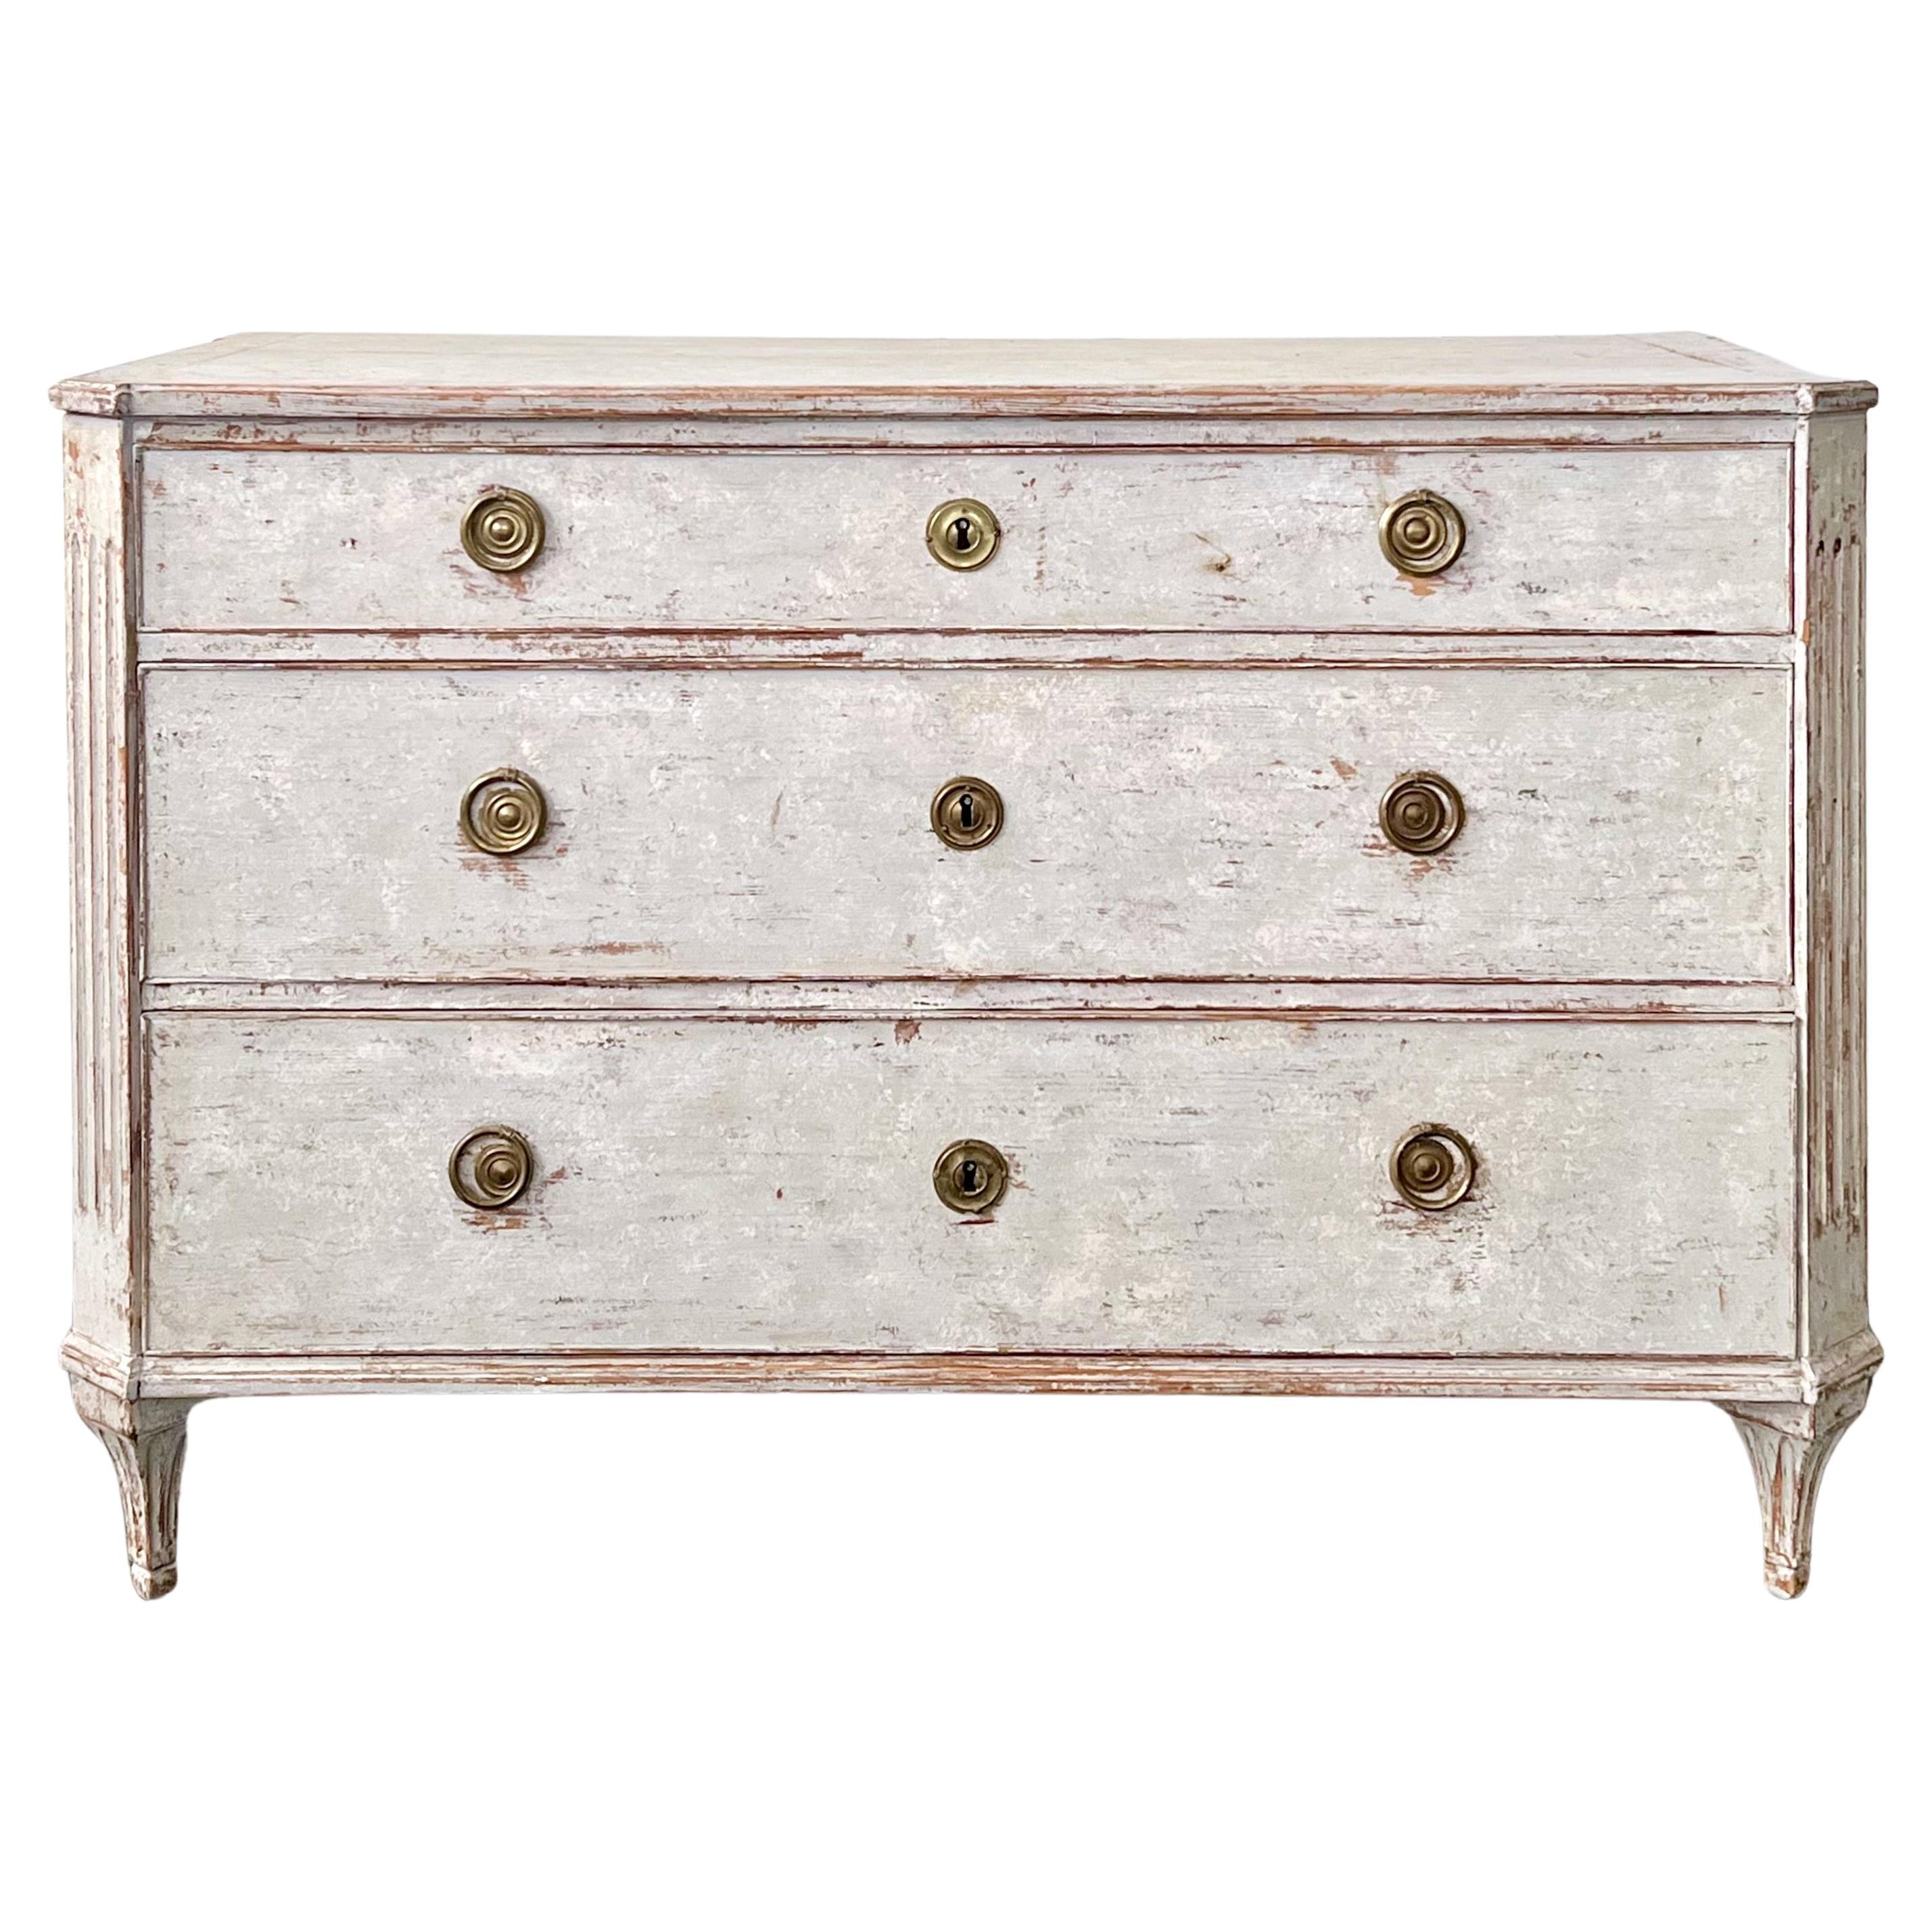 1790s Commodes and Chests of Drawers